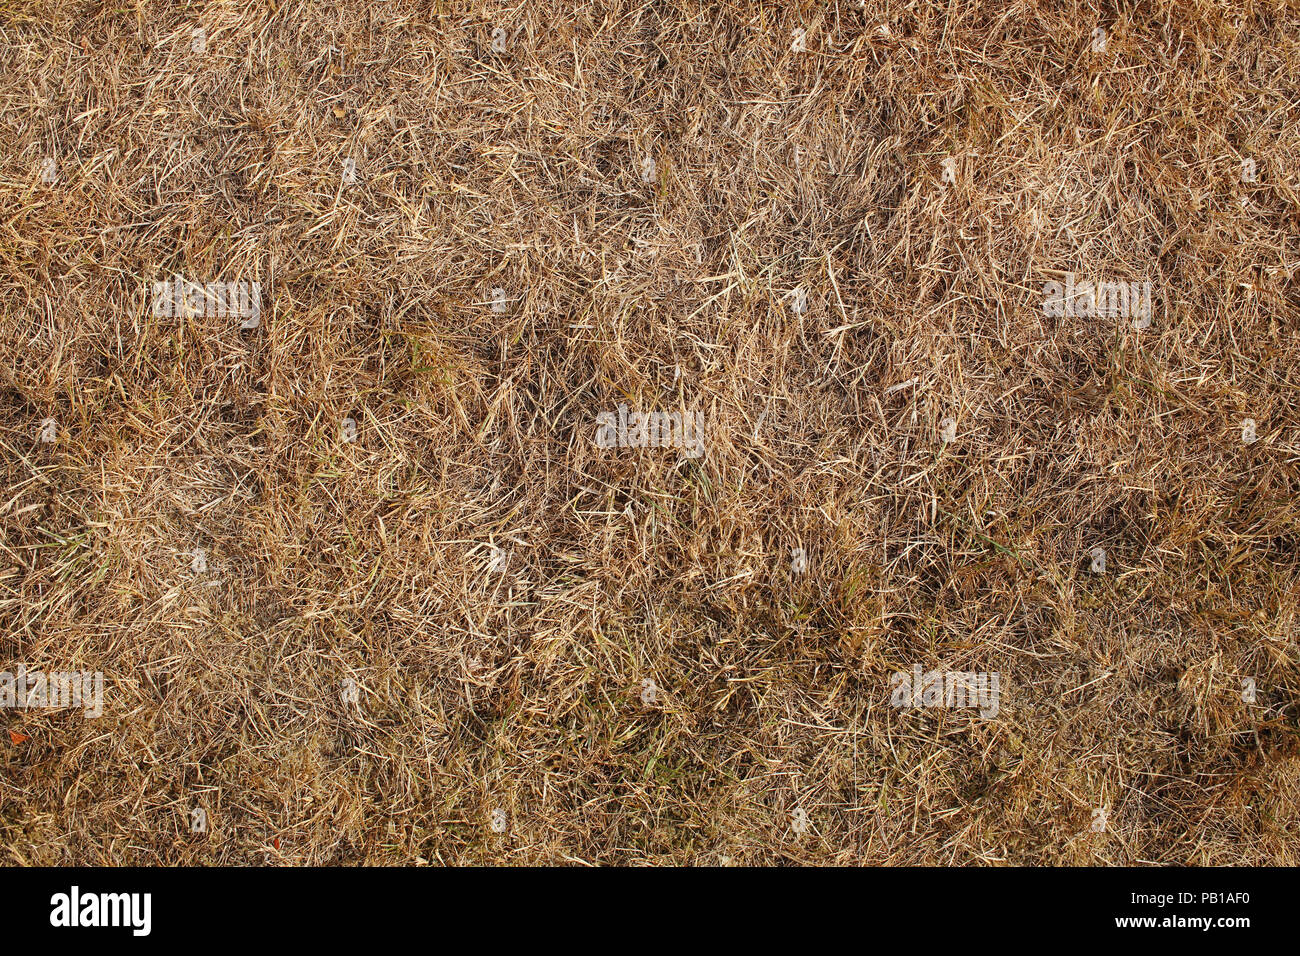 Sun parched lawn in the extremely dry and hot summer of 2018 in Denmark Stock Photo